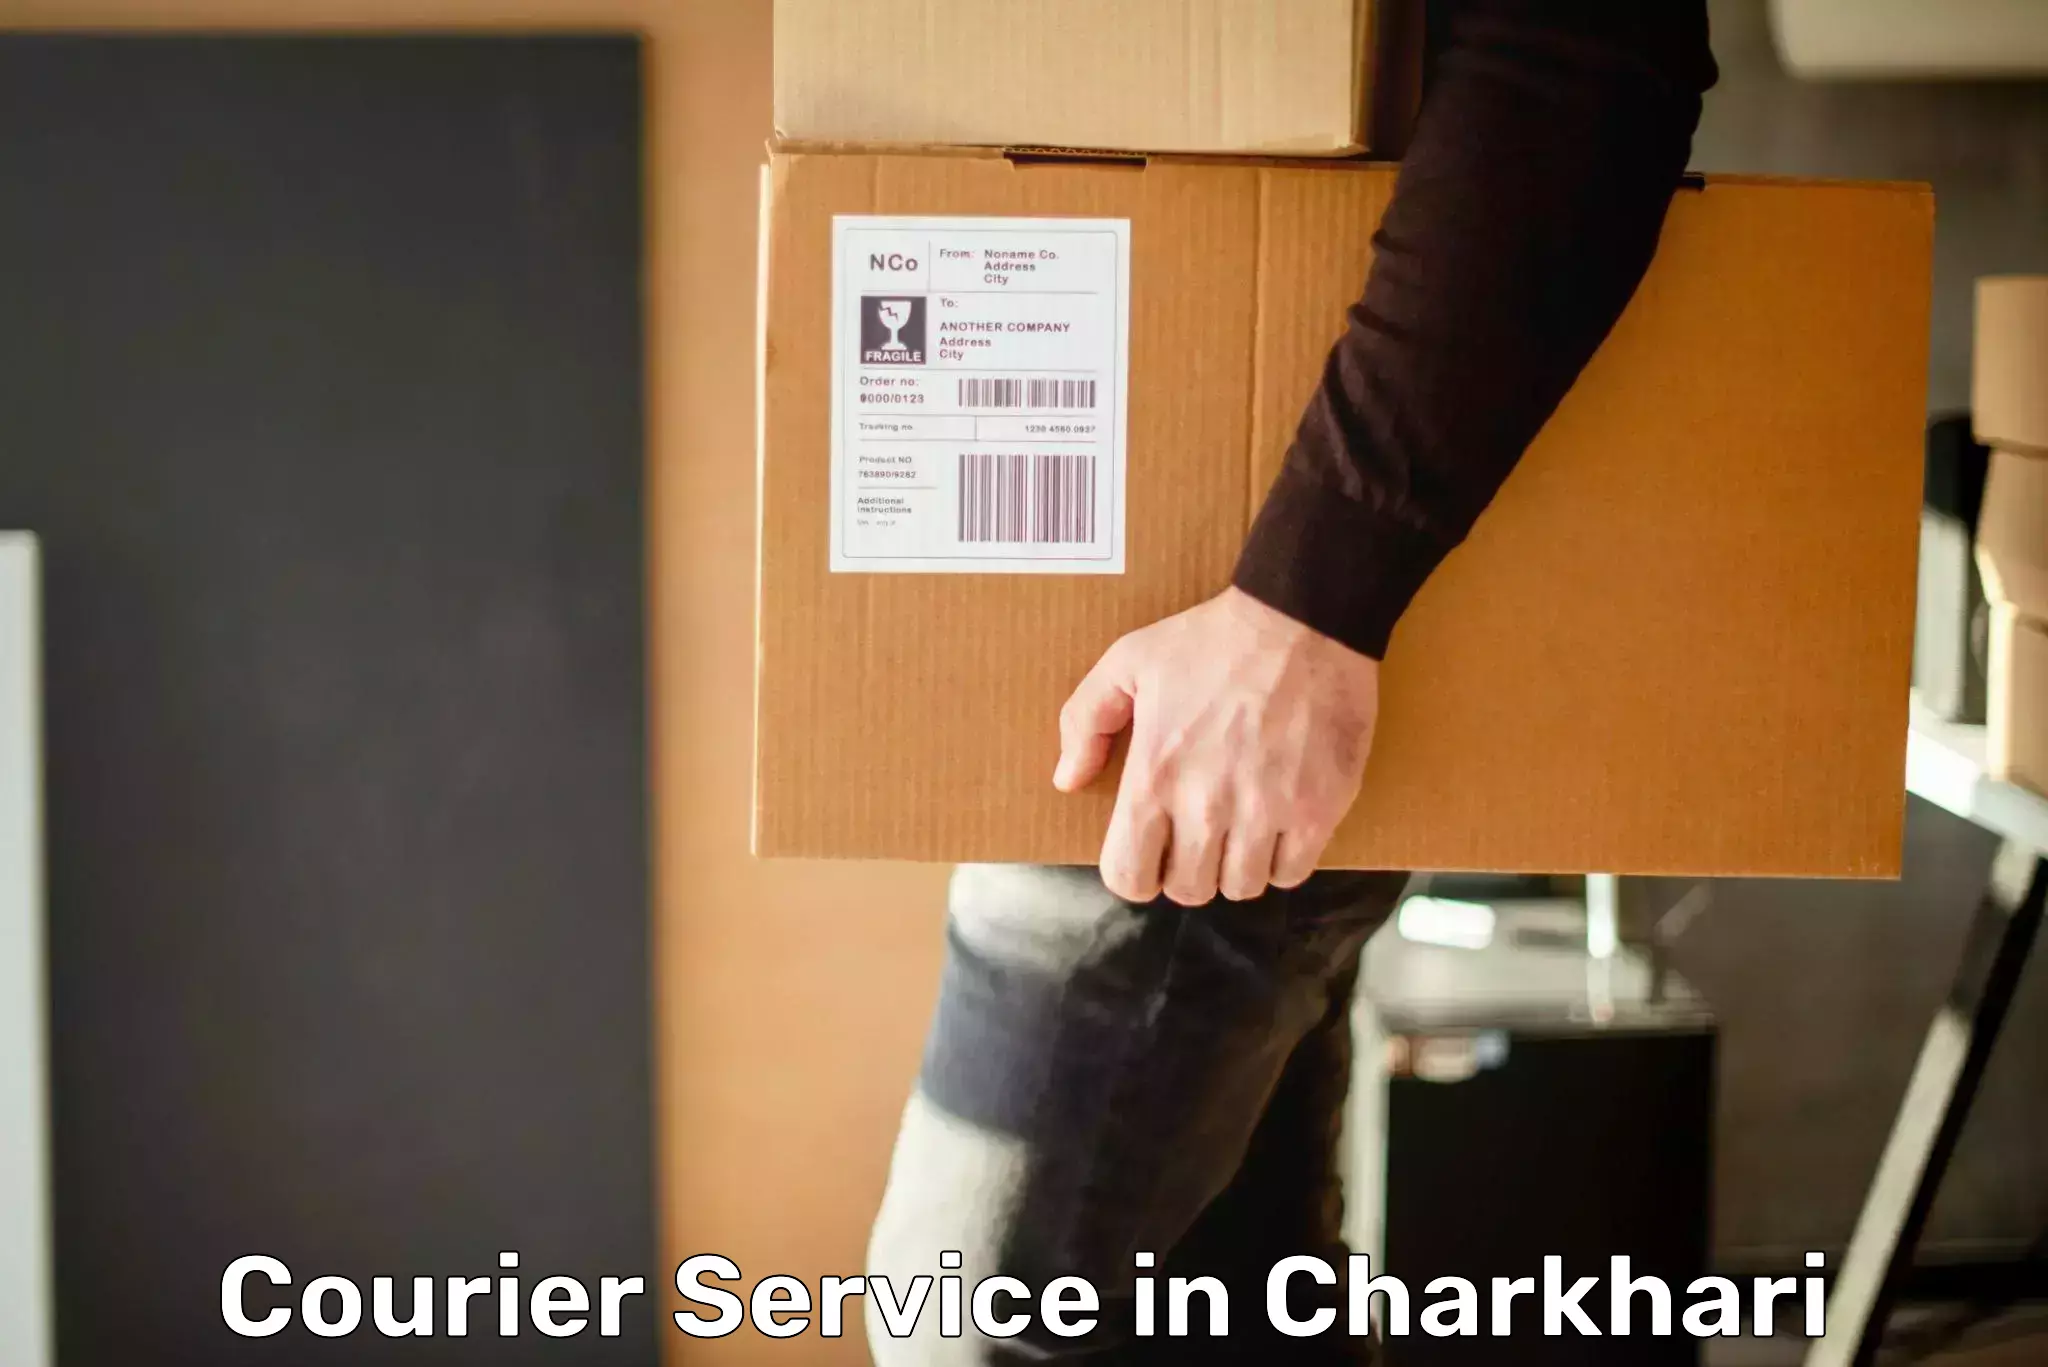 Tech-enabled shipping in Charkhari